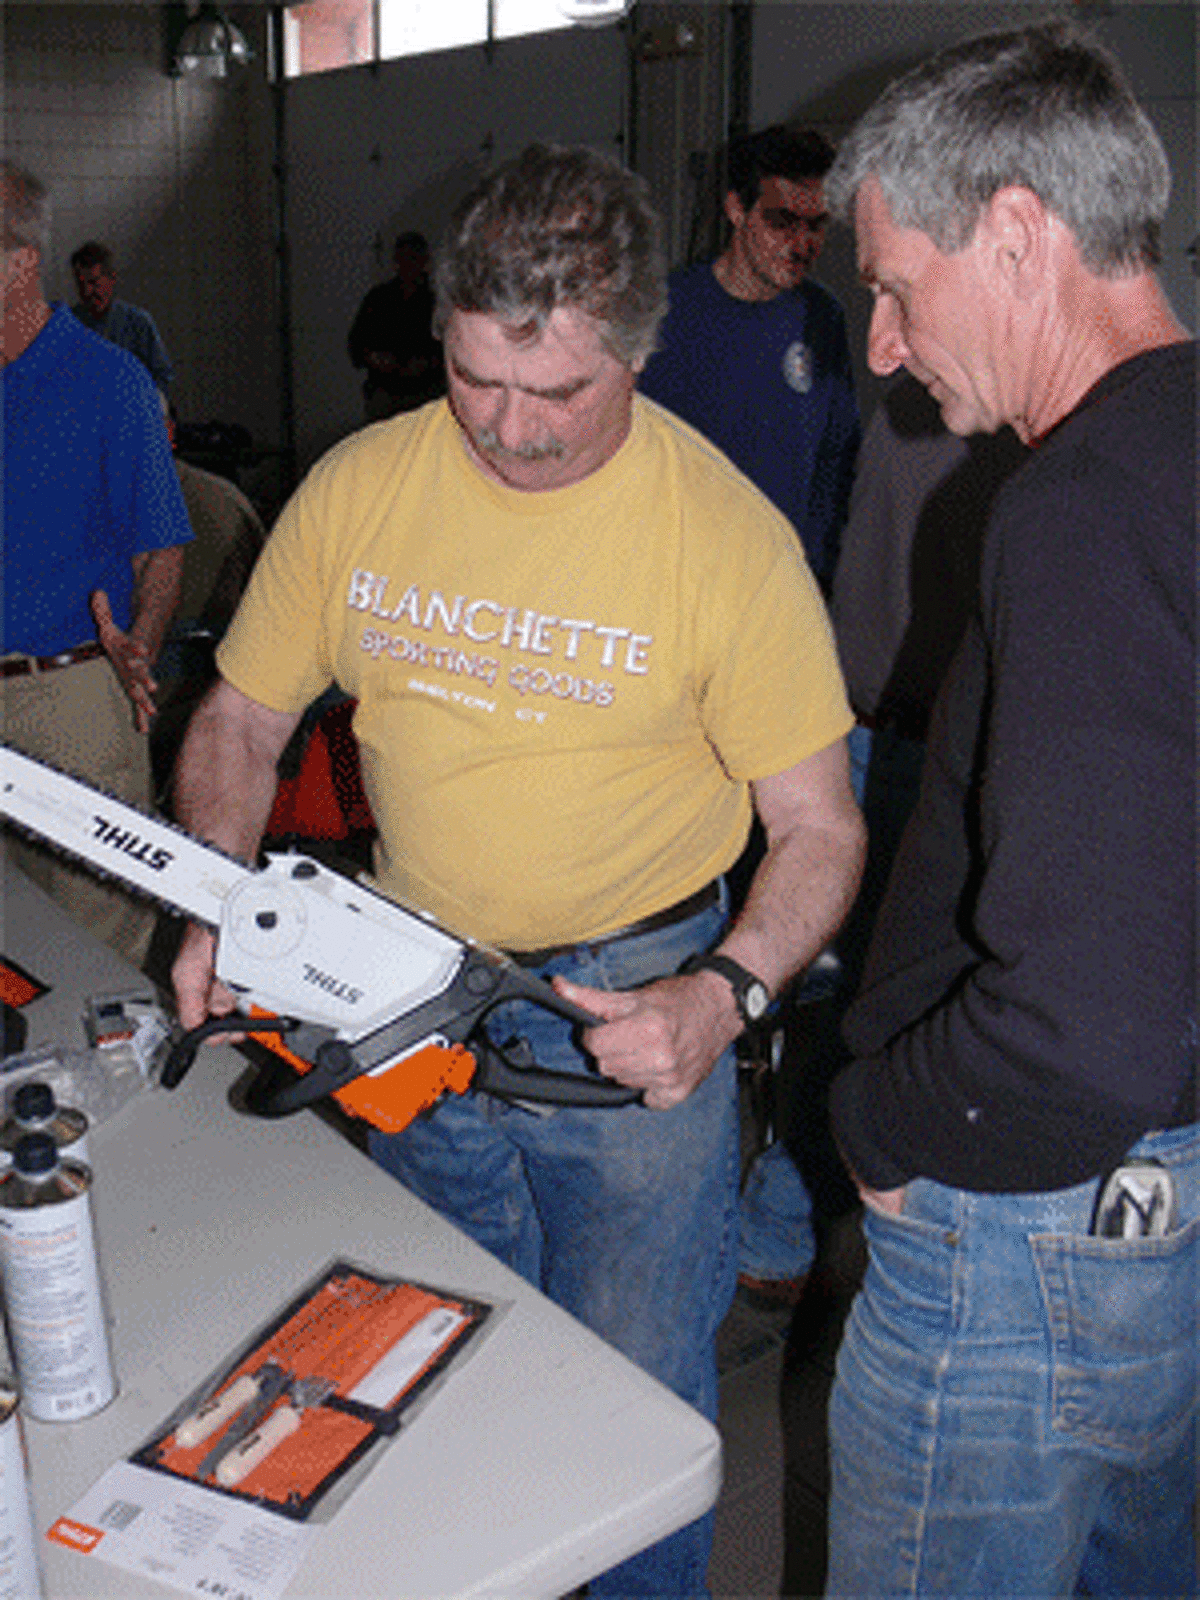 Art Botsford, left, checks out a chainsaw with Joe Puopolo during a break in the session. Botsford and Puopolo both work for the Shelton Parks and Recreation Department.